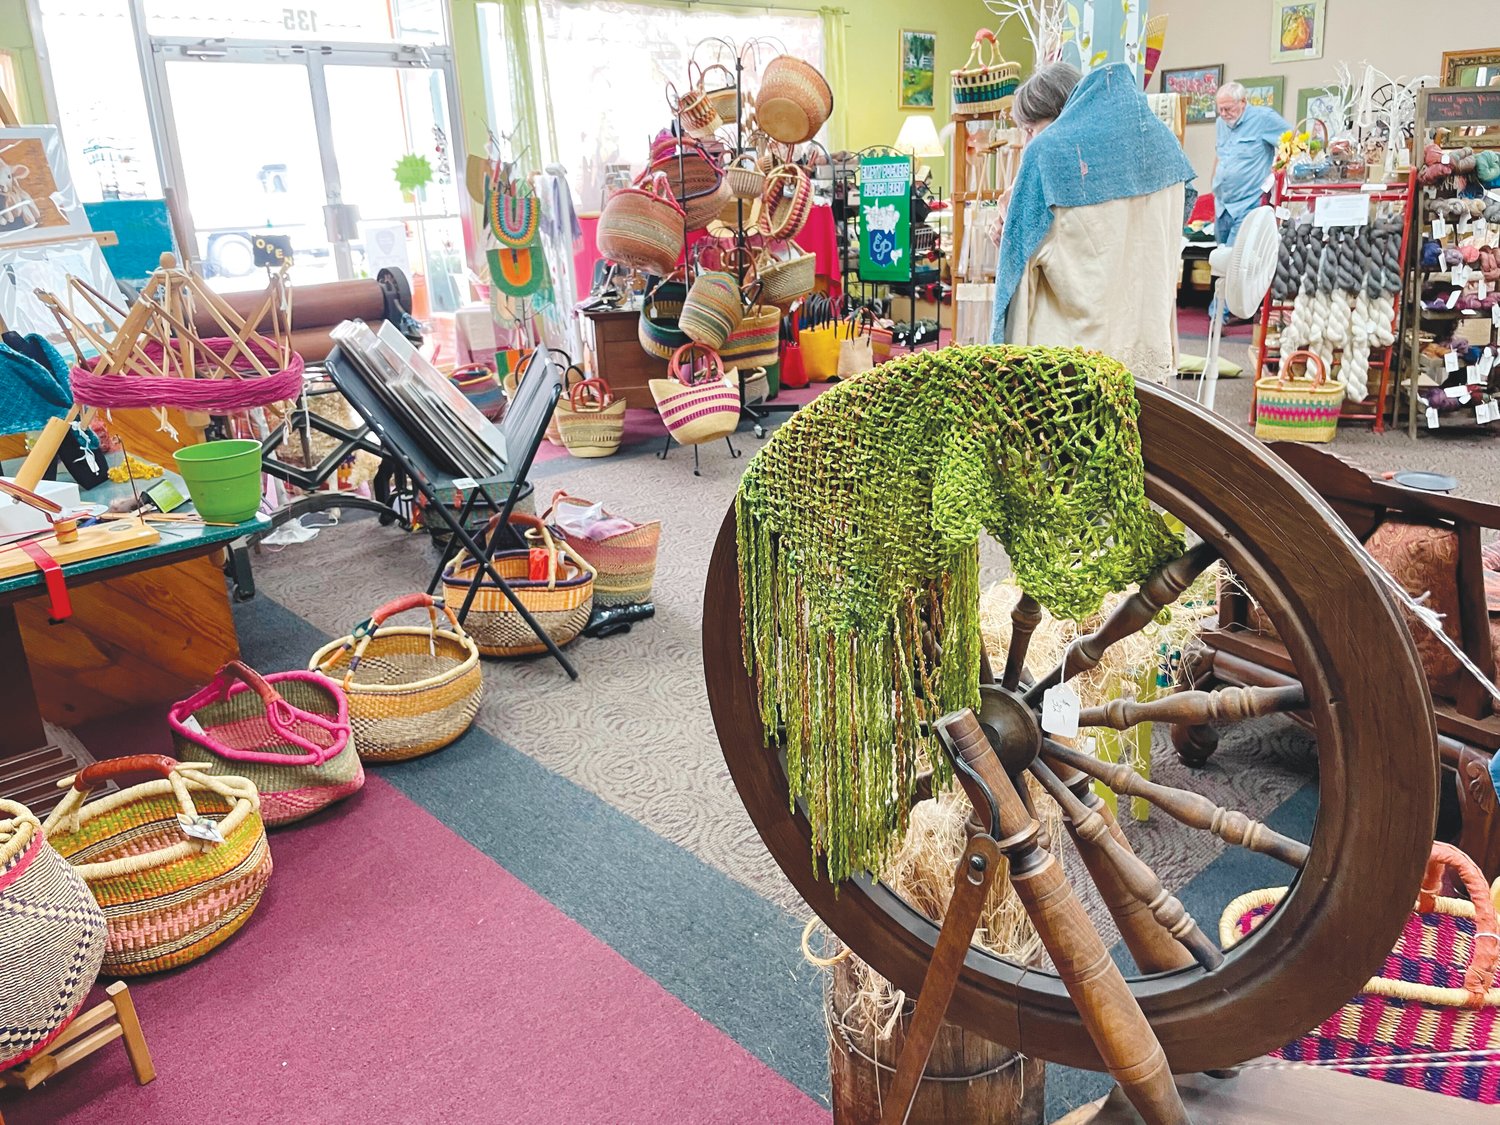 Hand-crafted goods and tools such as baskets and yarn lay on display at Twin Birch & Teasel on Monday in Siler City. The shop in downtown Siler City has specialized in making birchwood fiber art tools since 1982.